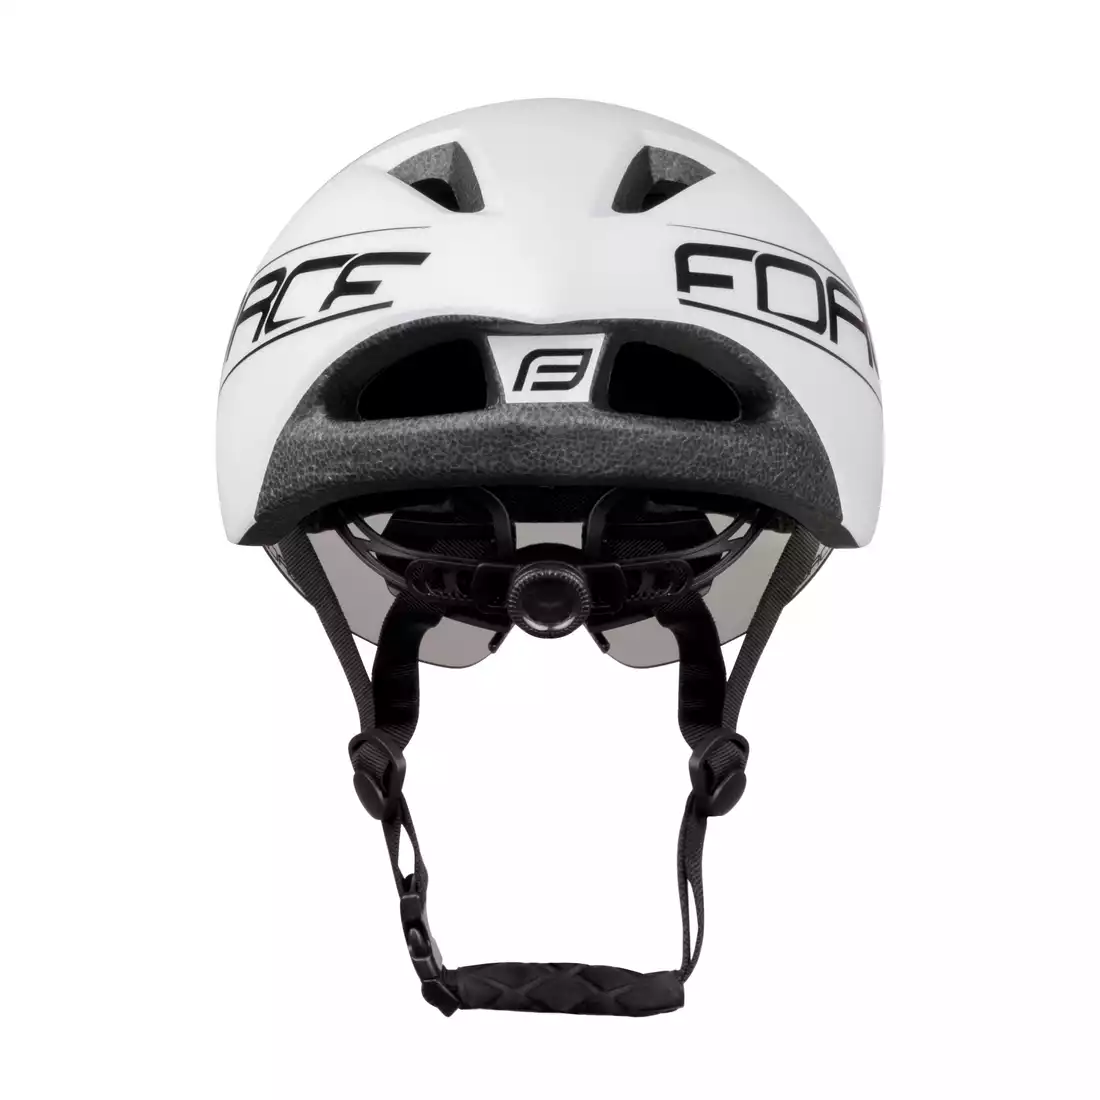 FORCE WASP Cycling helmet, white